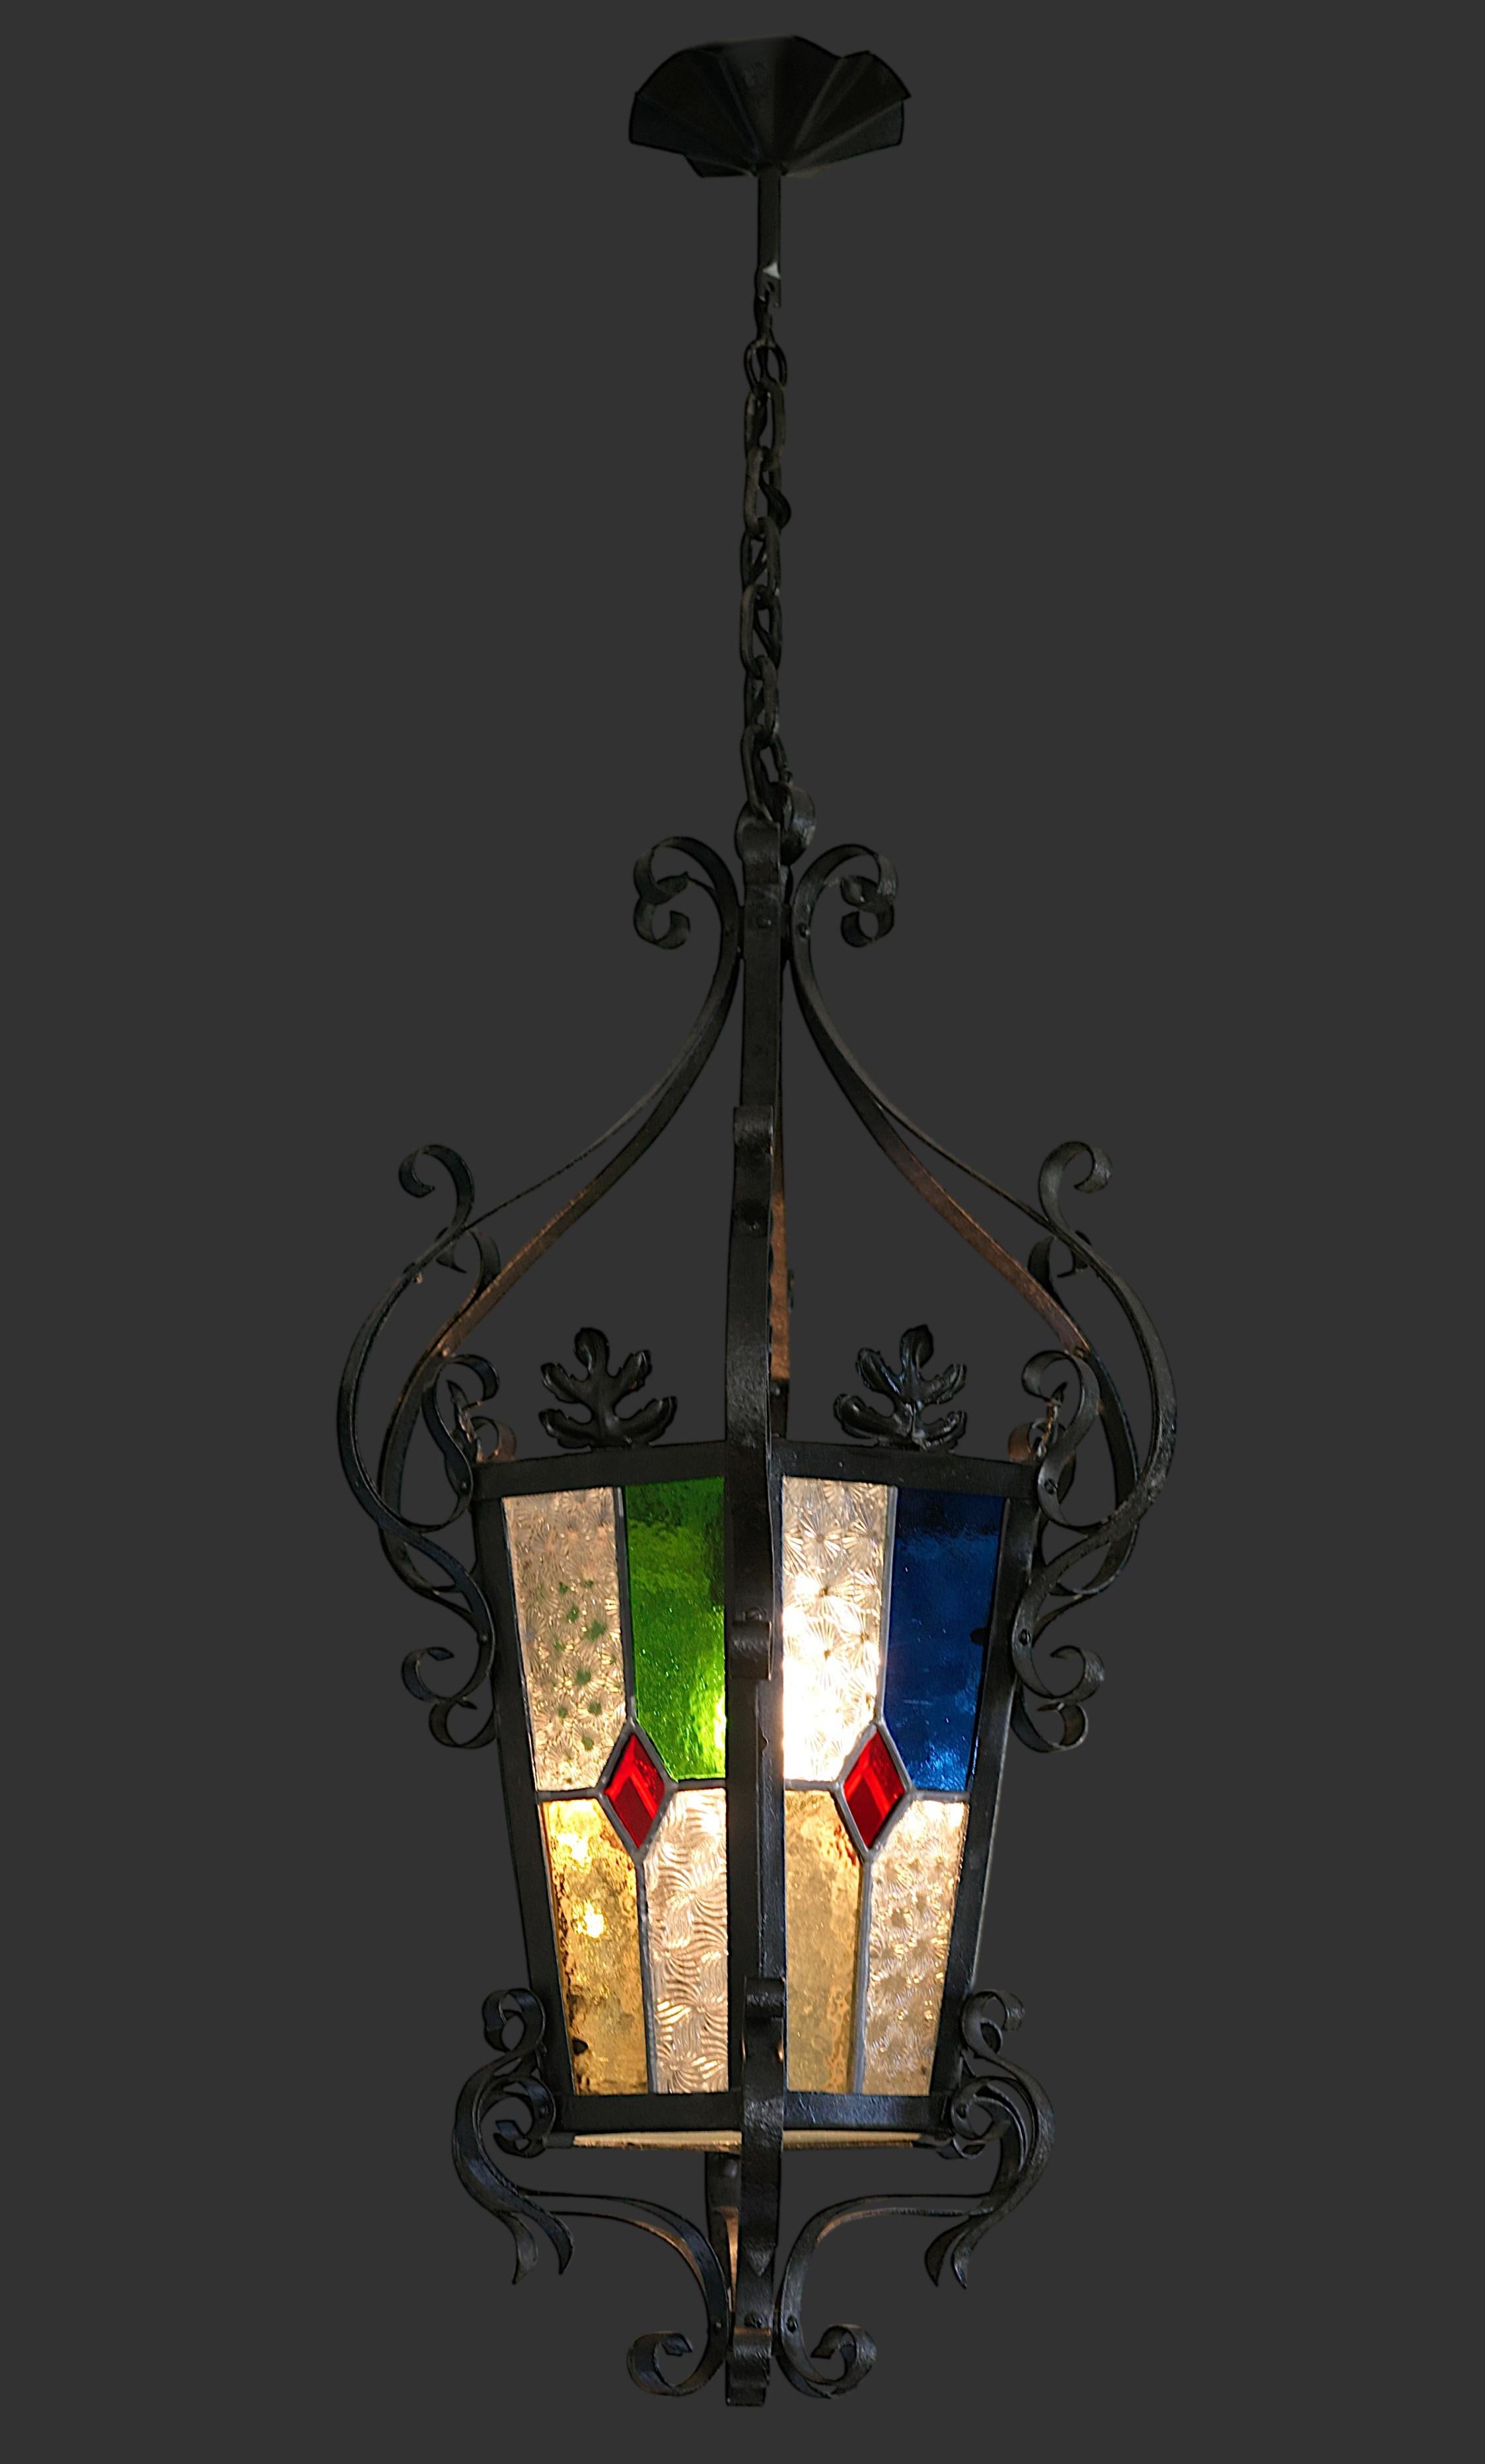 French Art Nouveau stained-glass lantern, France, 1890-1900. Stained-glass and iron. Hammered cathedral glass. Full height: 36.2